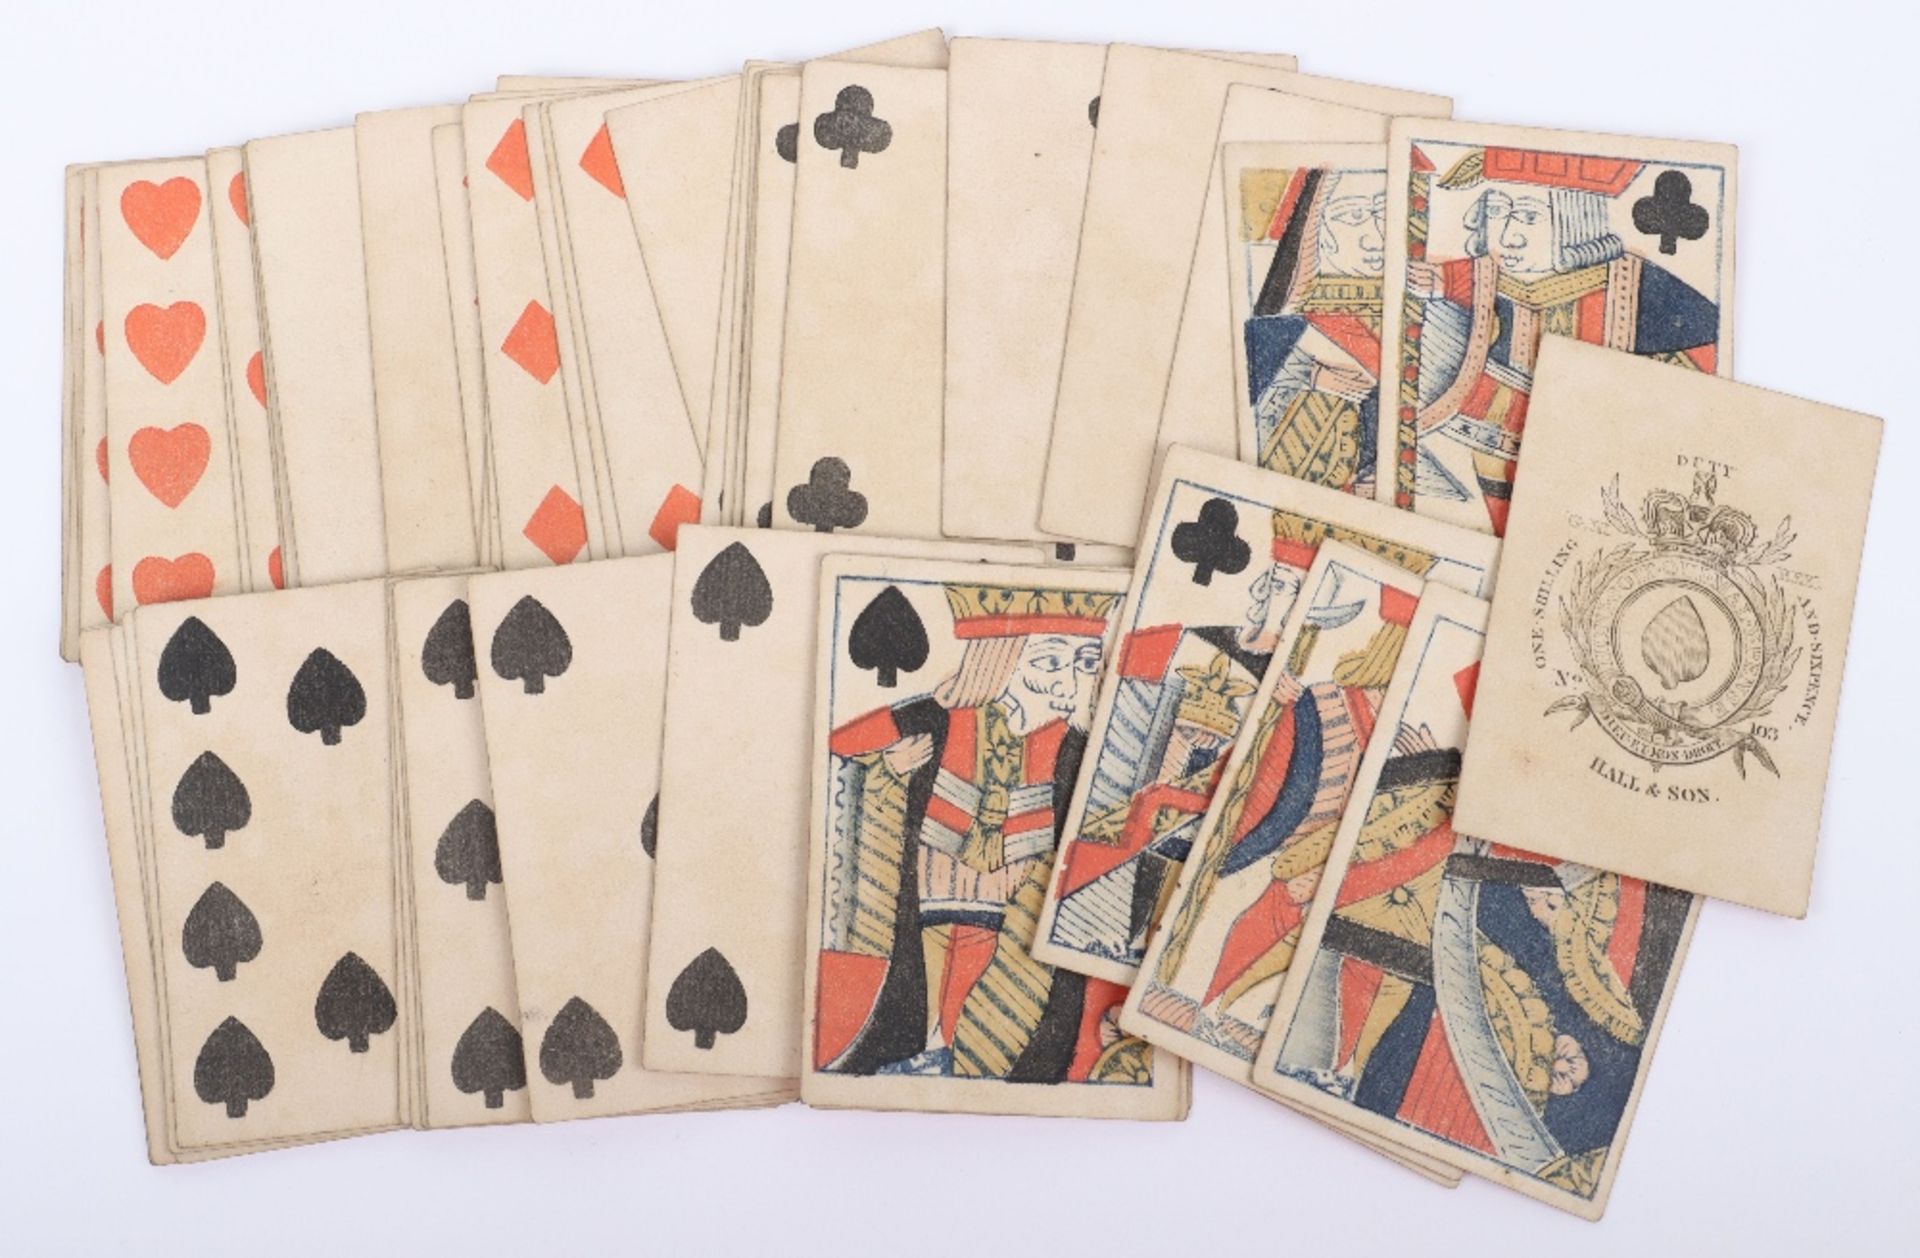 Early 19th century printed playing card set, Hall & Son